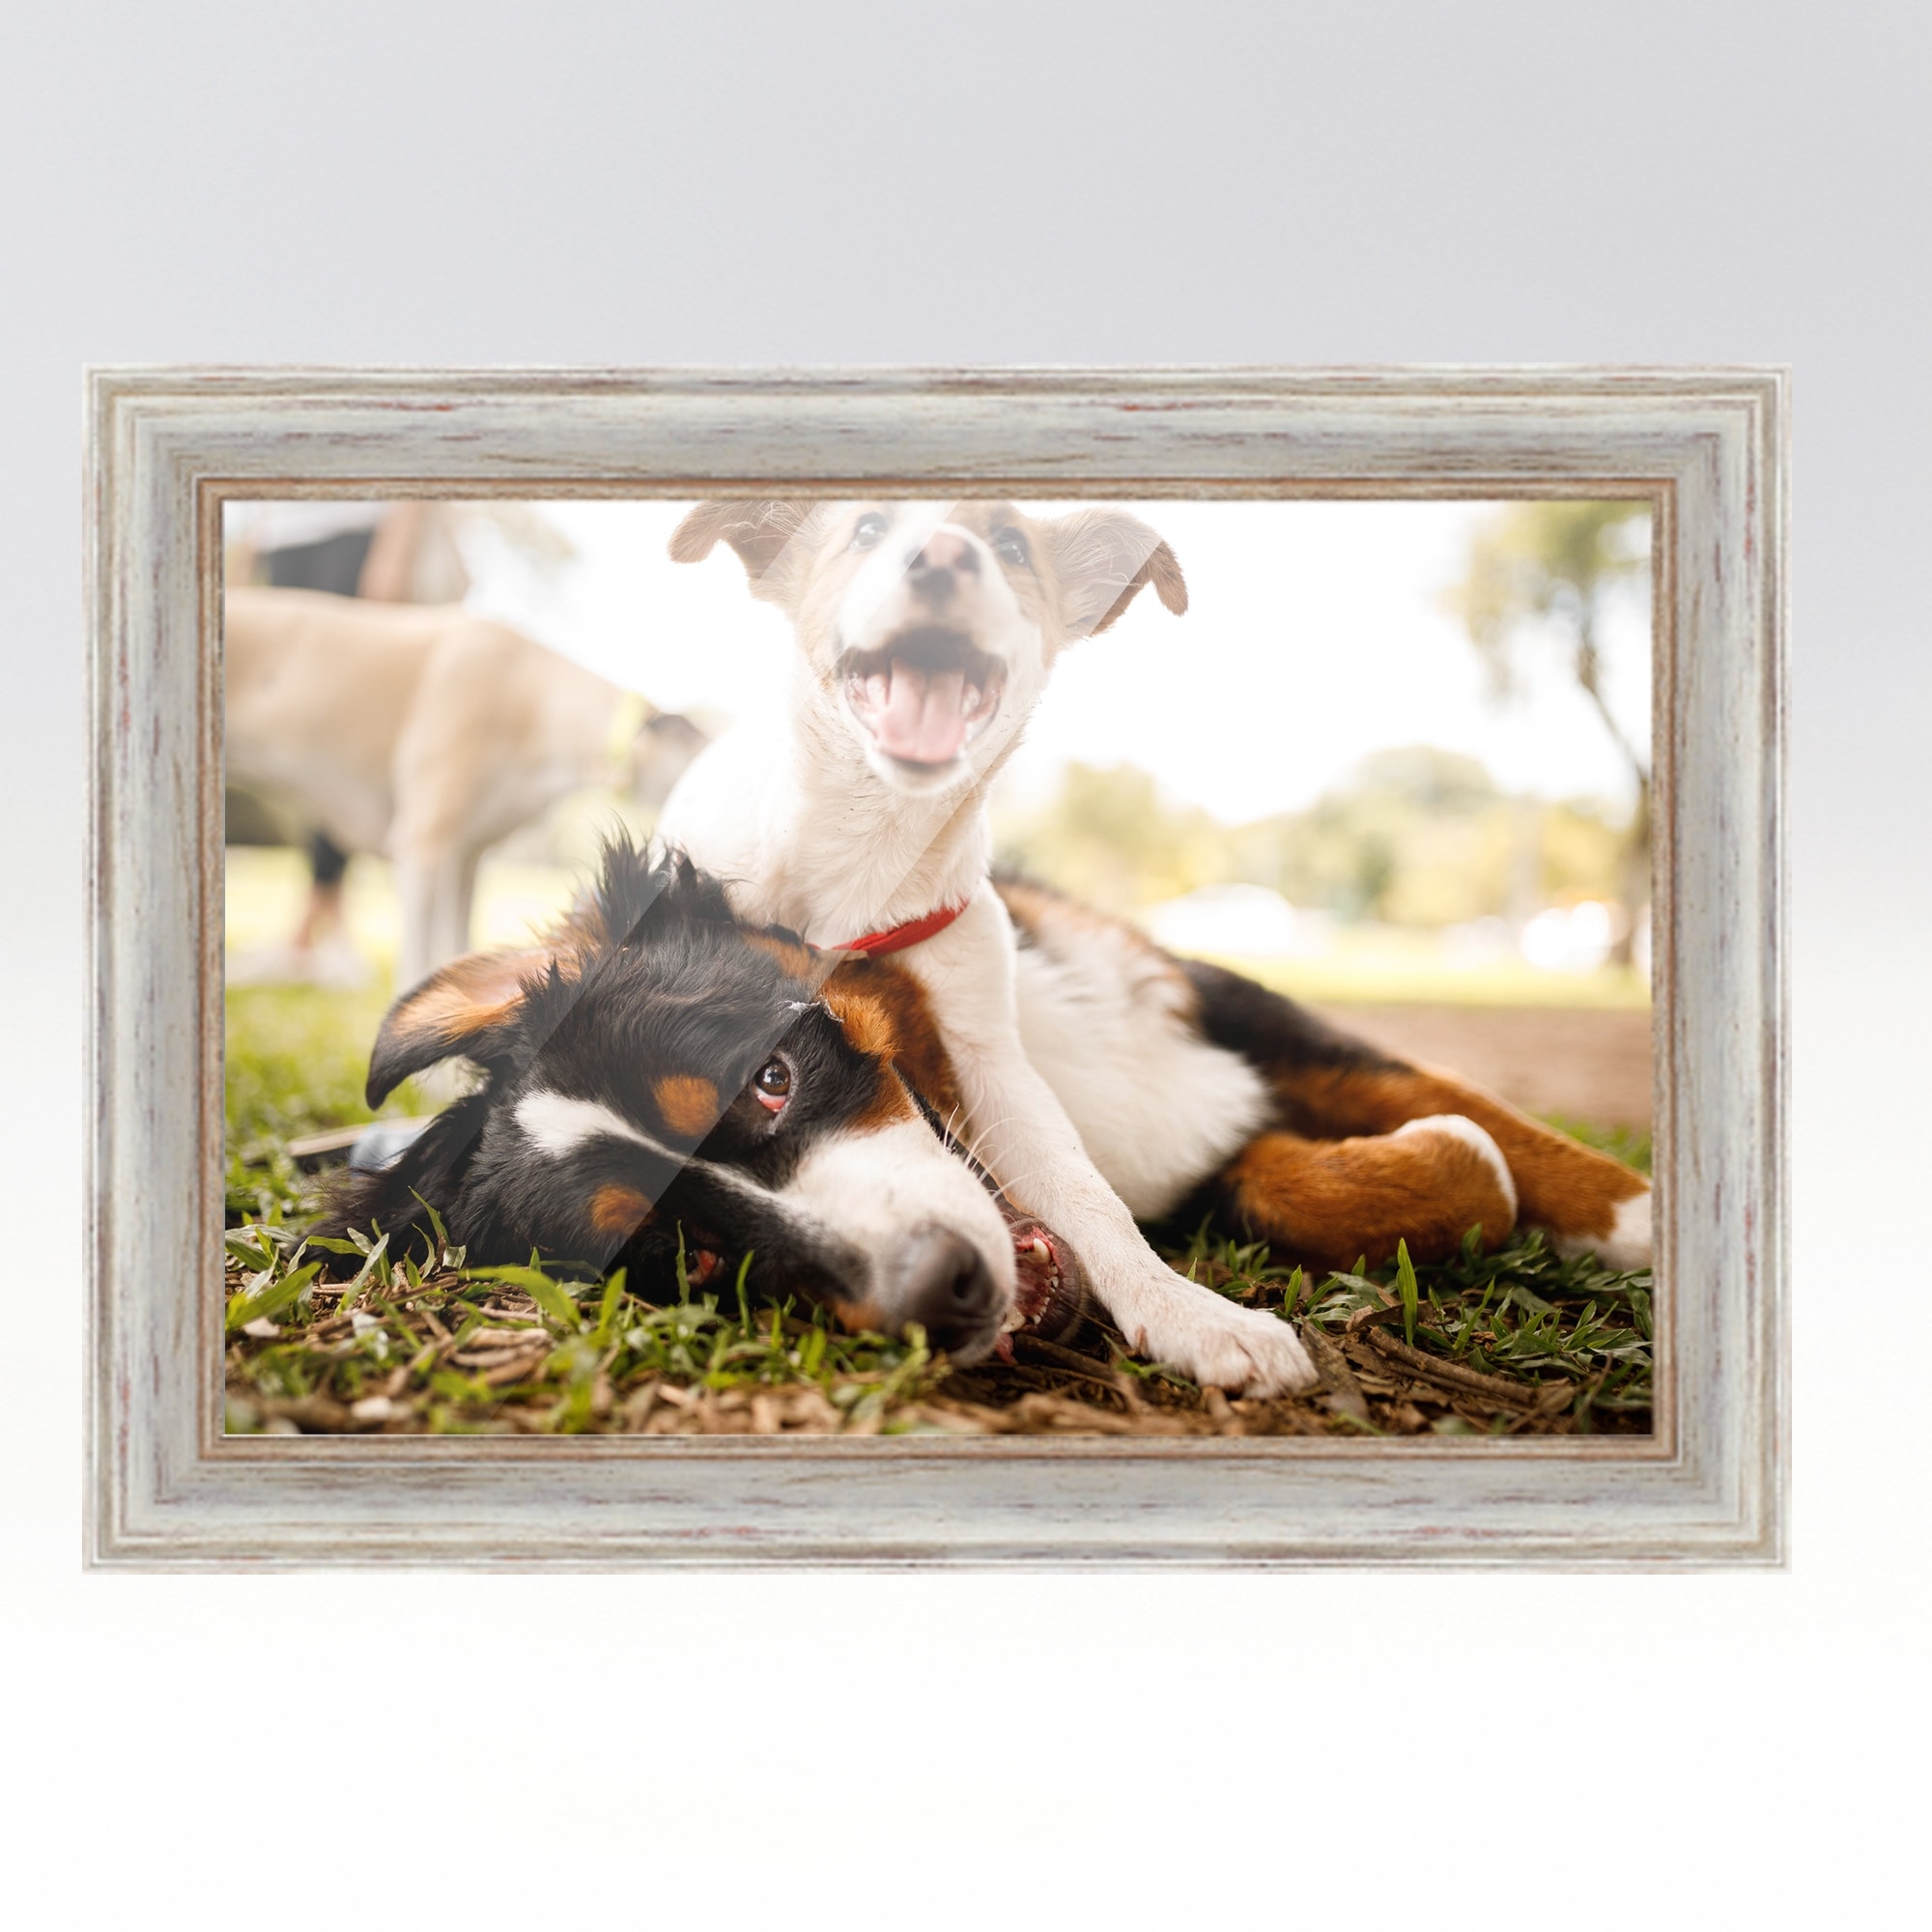 18x24 White Picture Frame with 15.5x19.5 White Mat Opening for 16x20 Image,  0.75 Inch Border, UV